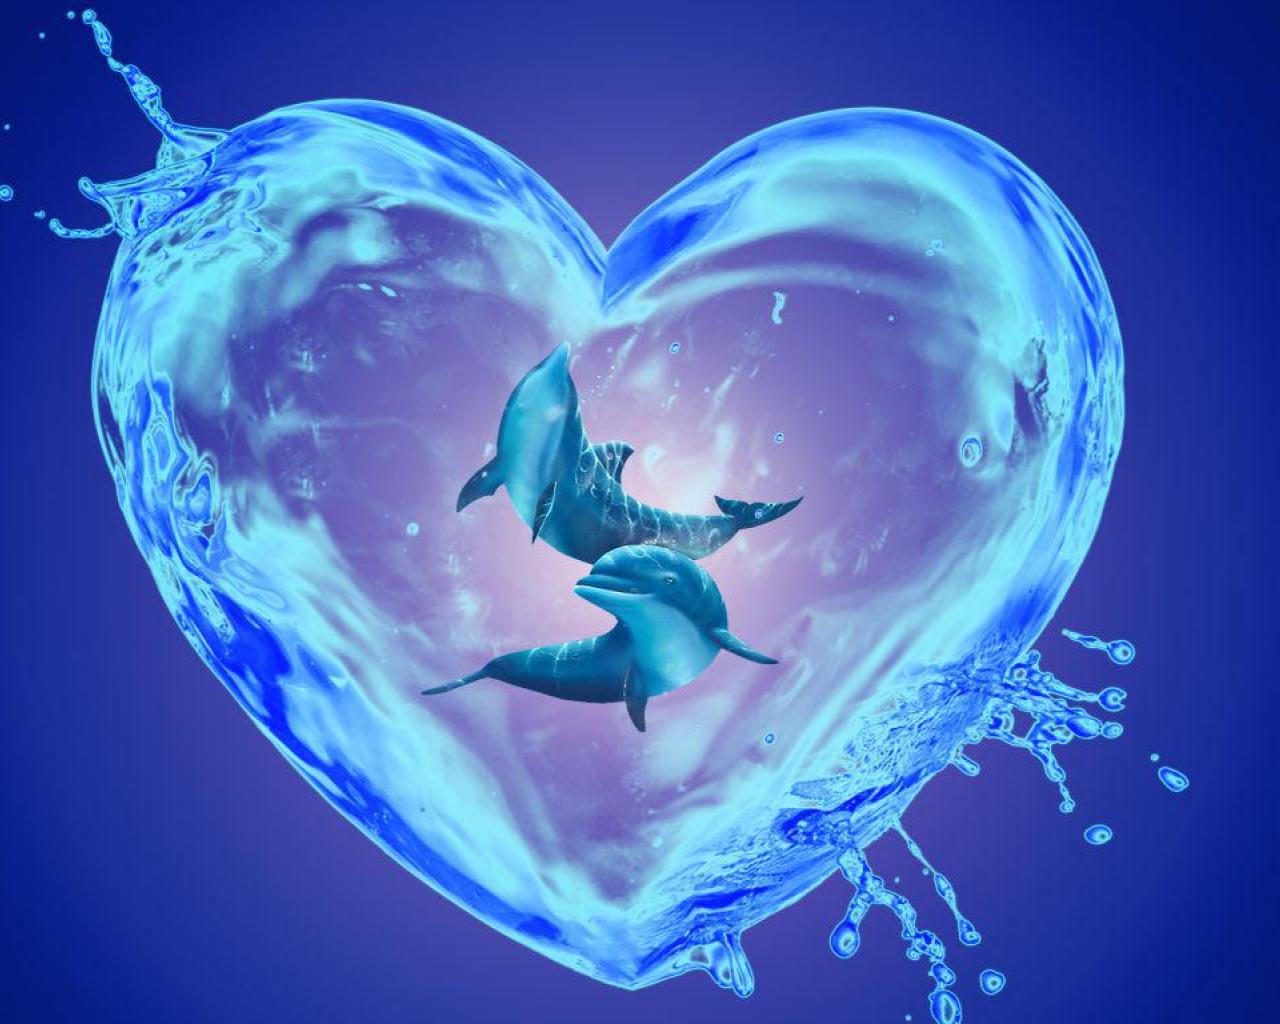 1280x1024 / Dolphin heart - (#147600) - High Quality and Resolution Wallpap...